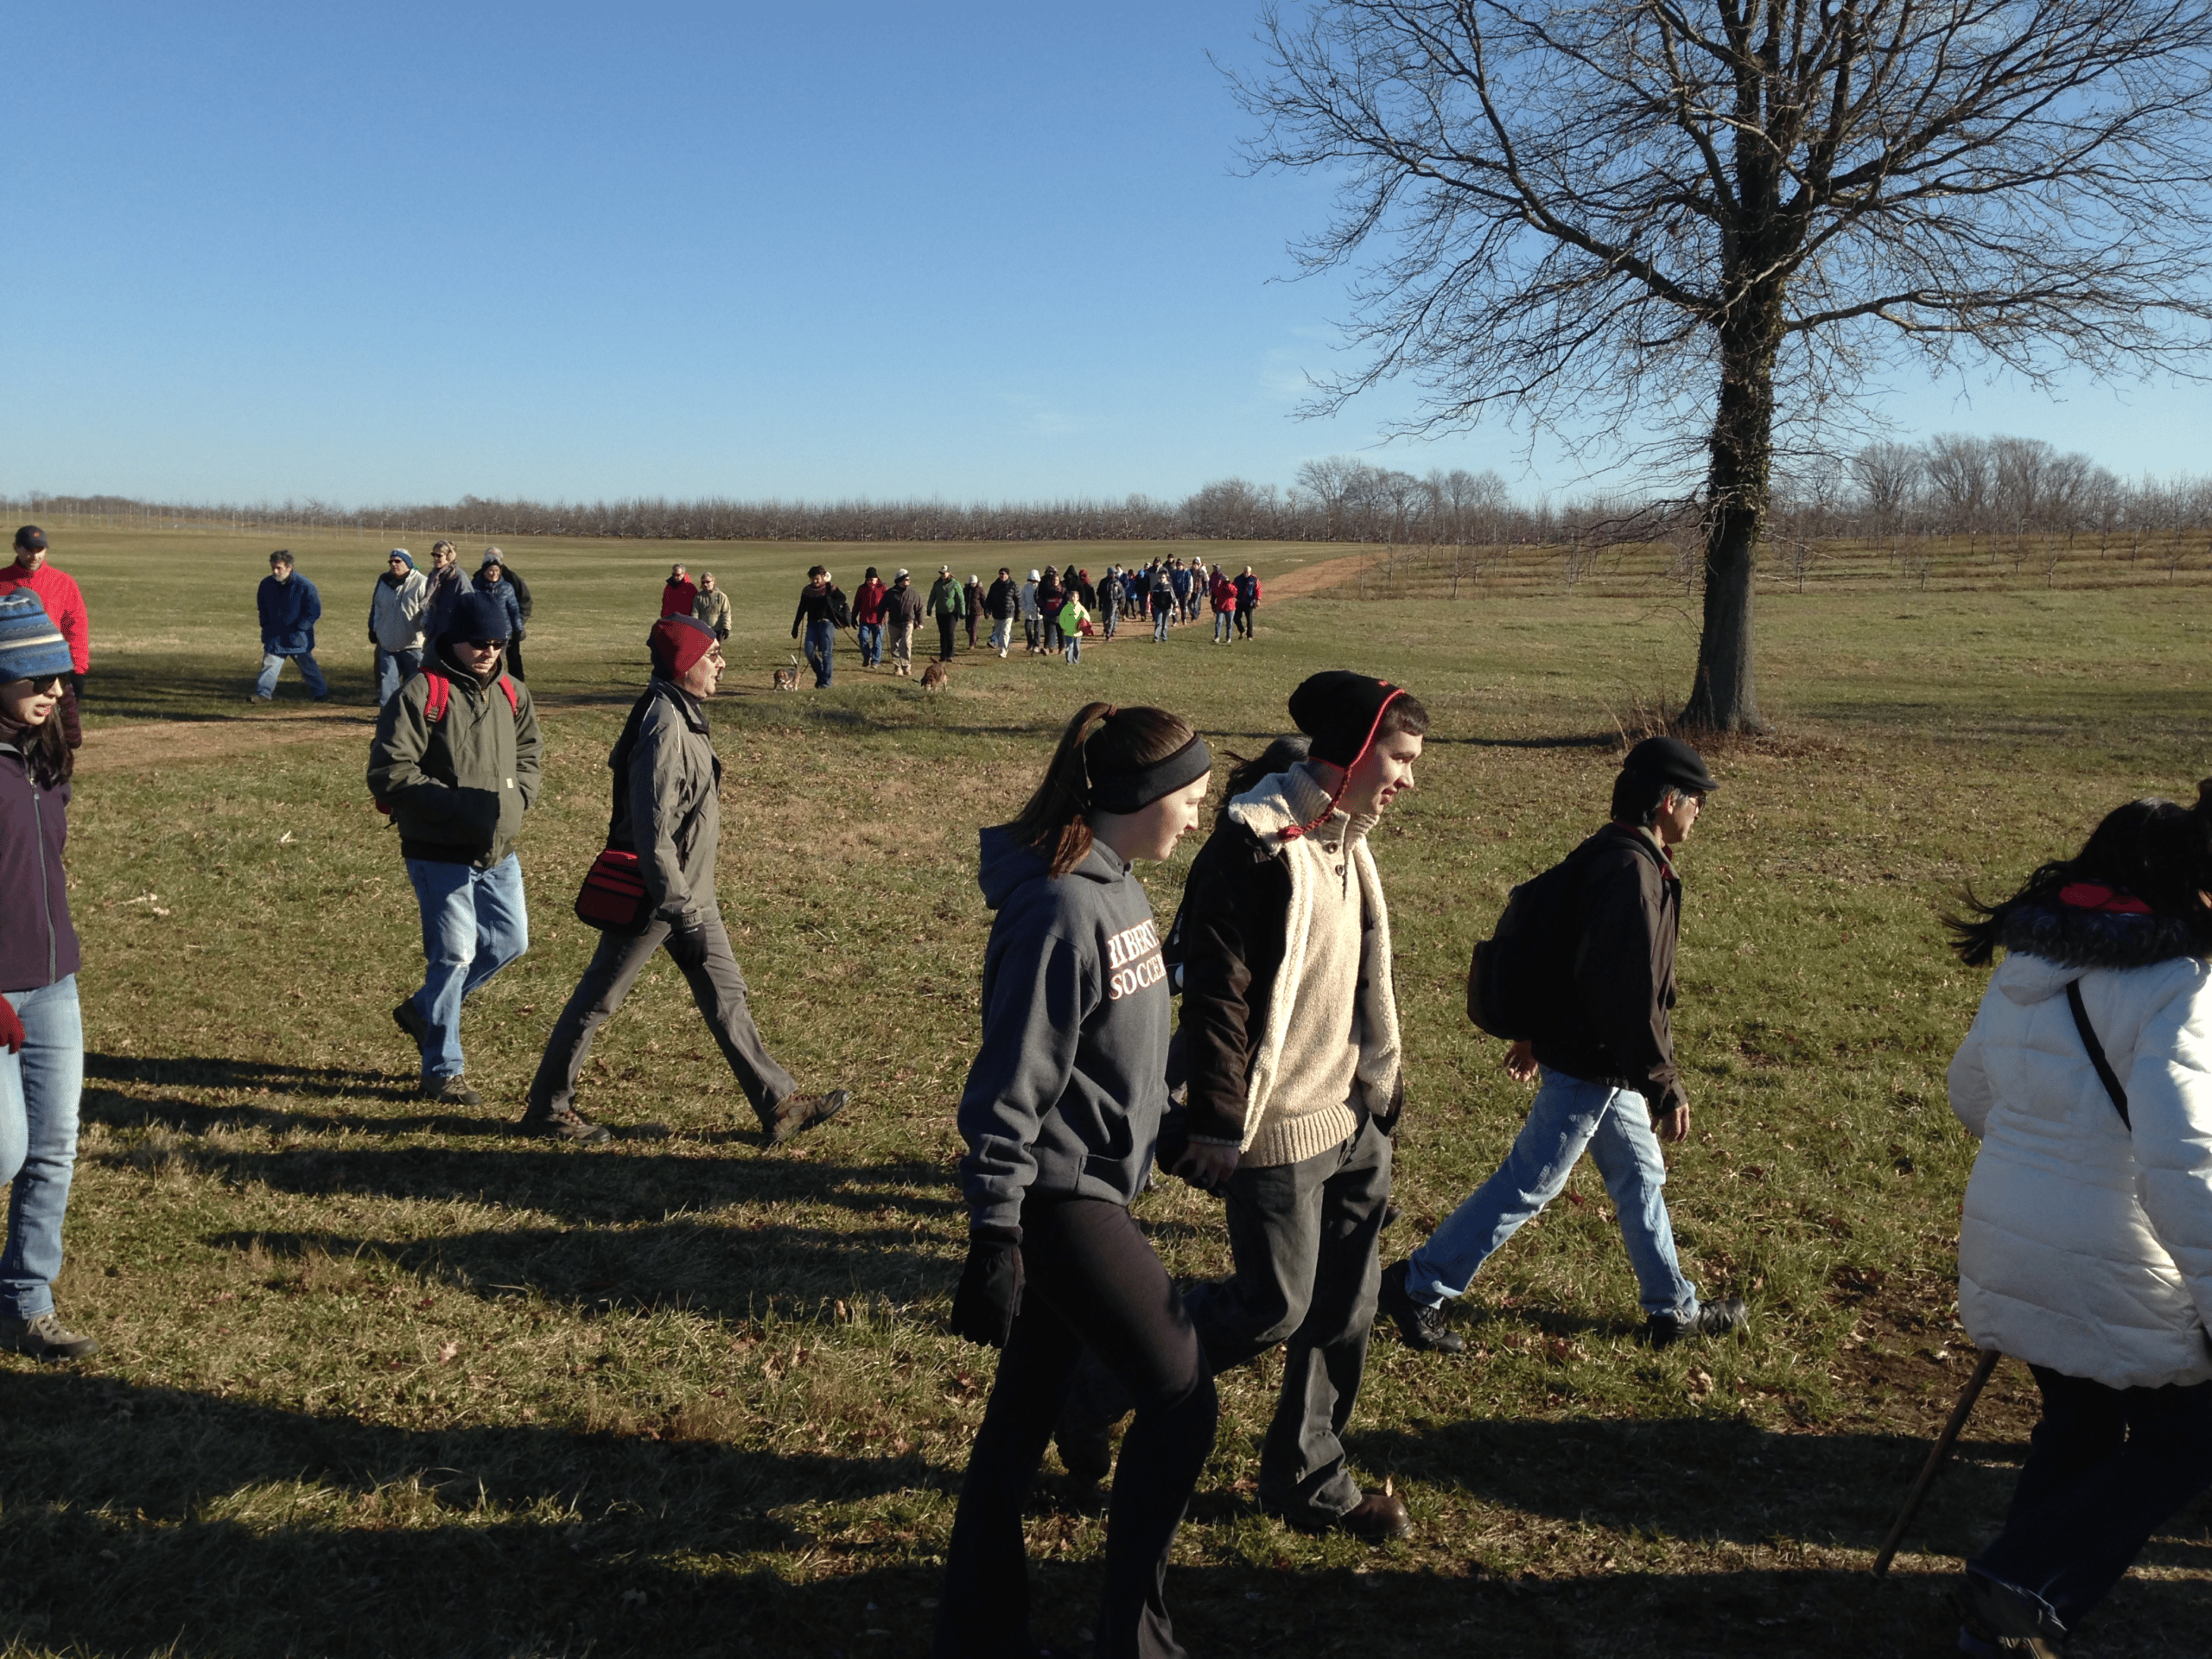 Some 70 participants in a First Day Hike at Monmouth Battlefield State Park in Freehold, New Jersey